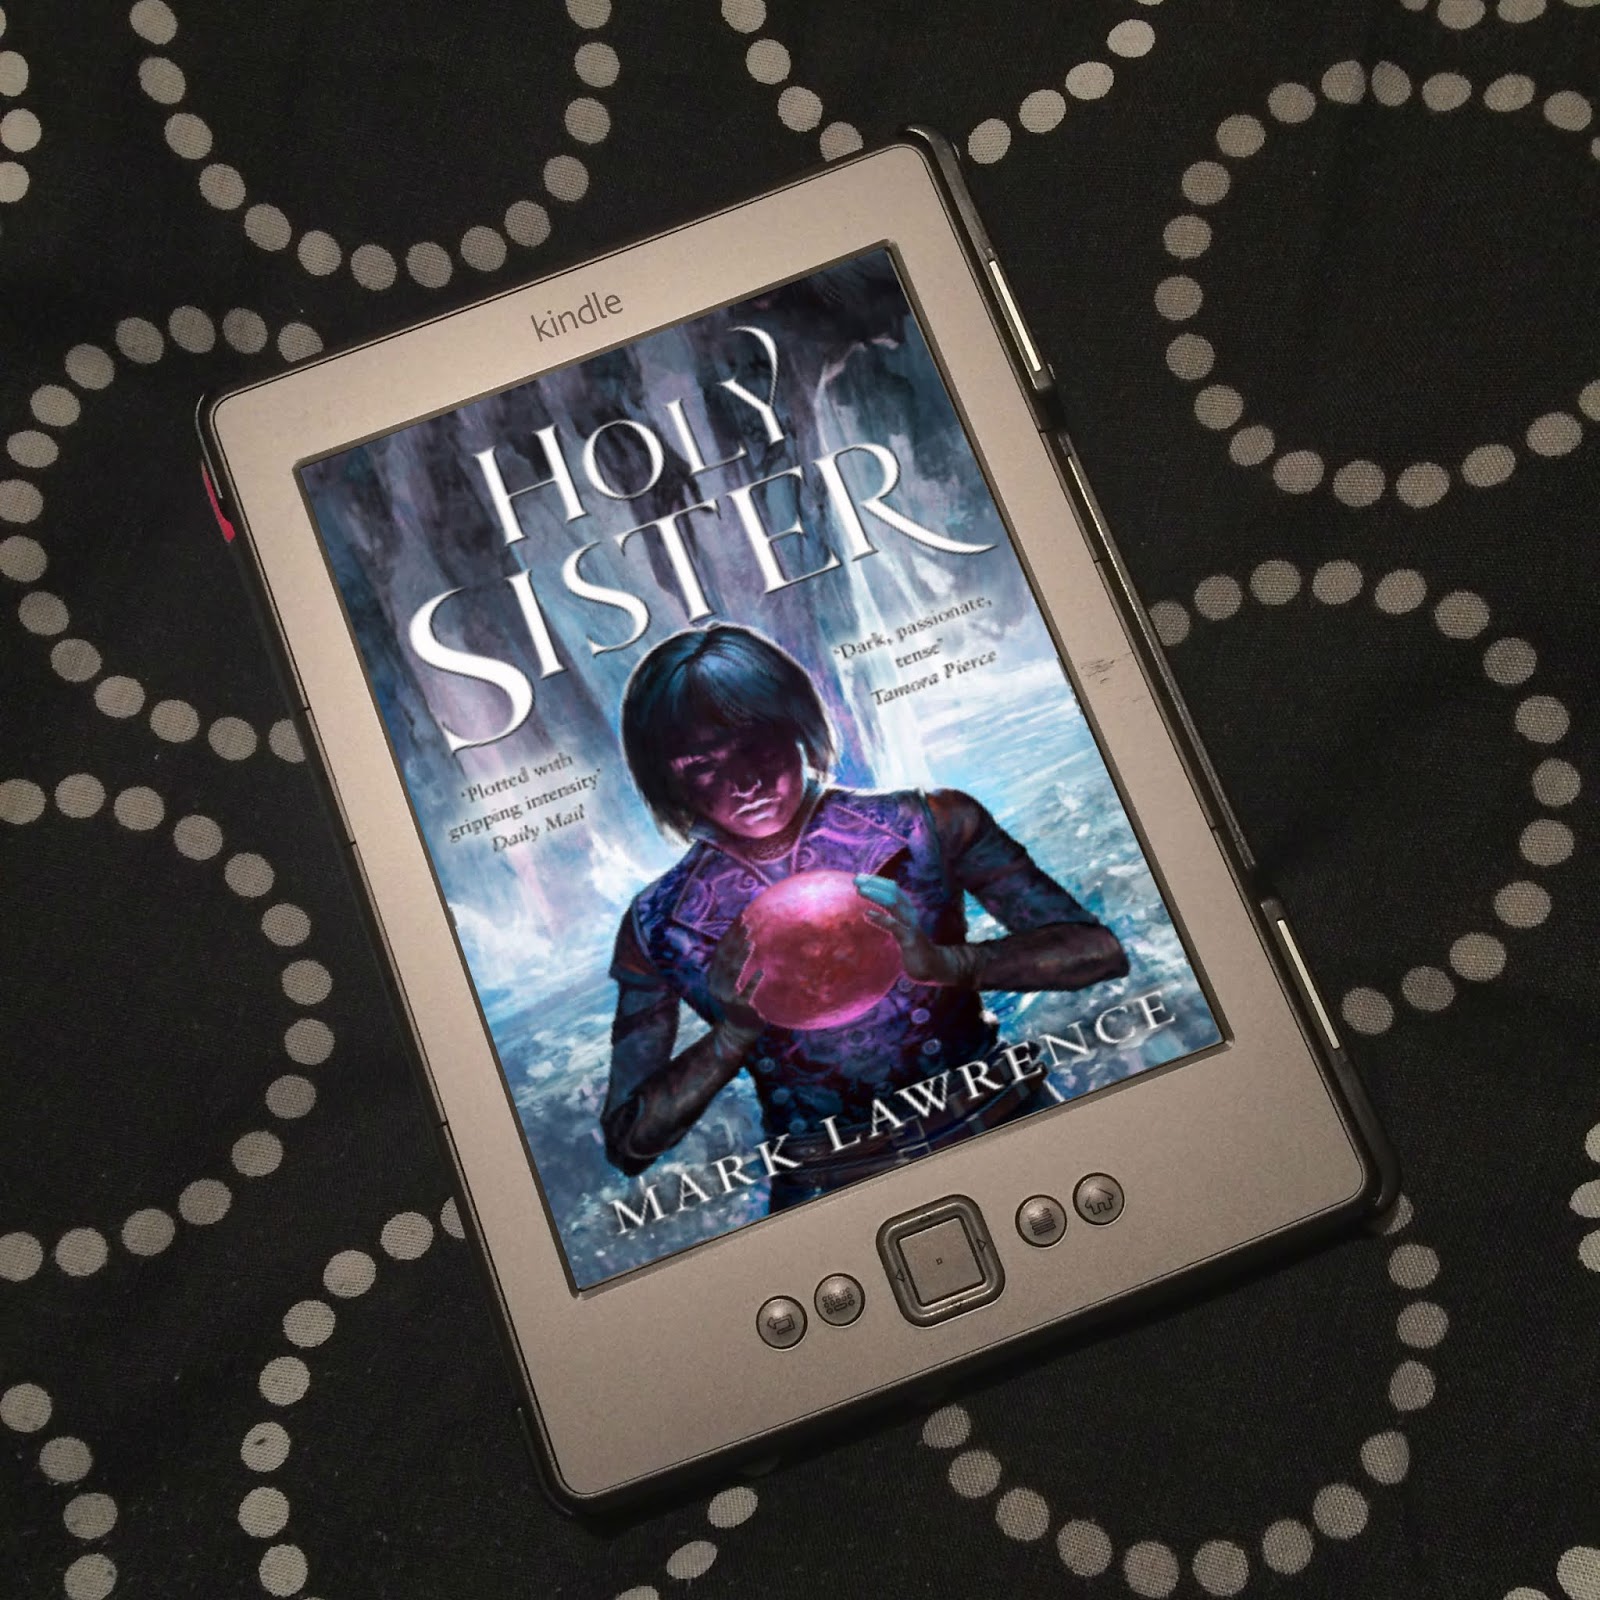 Holy Sister by Mark Lawrence